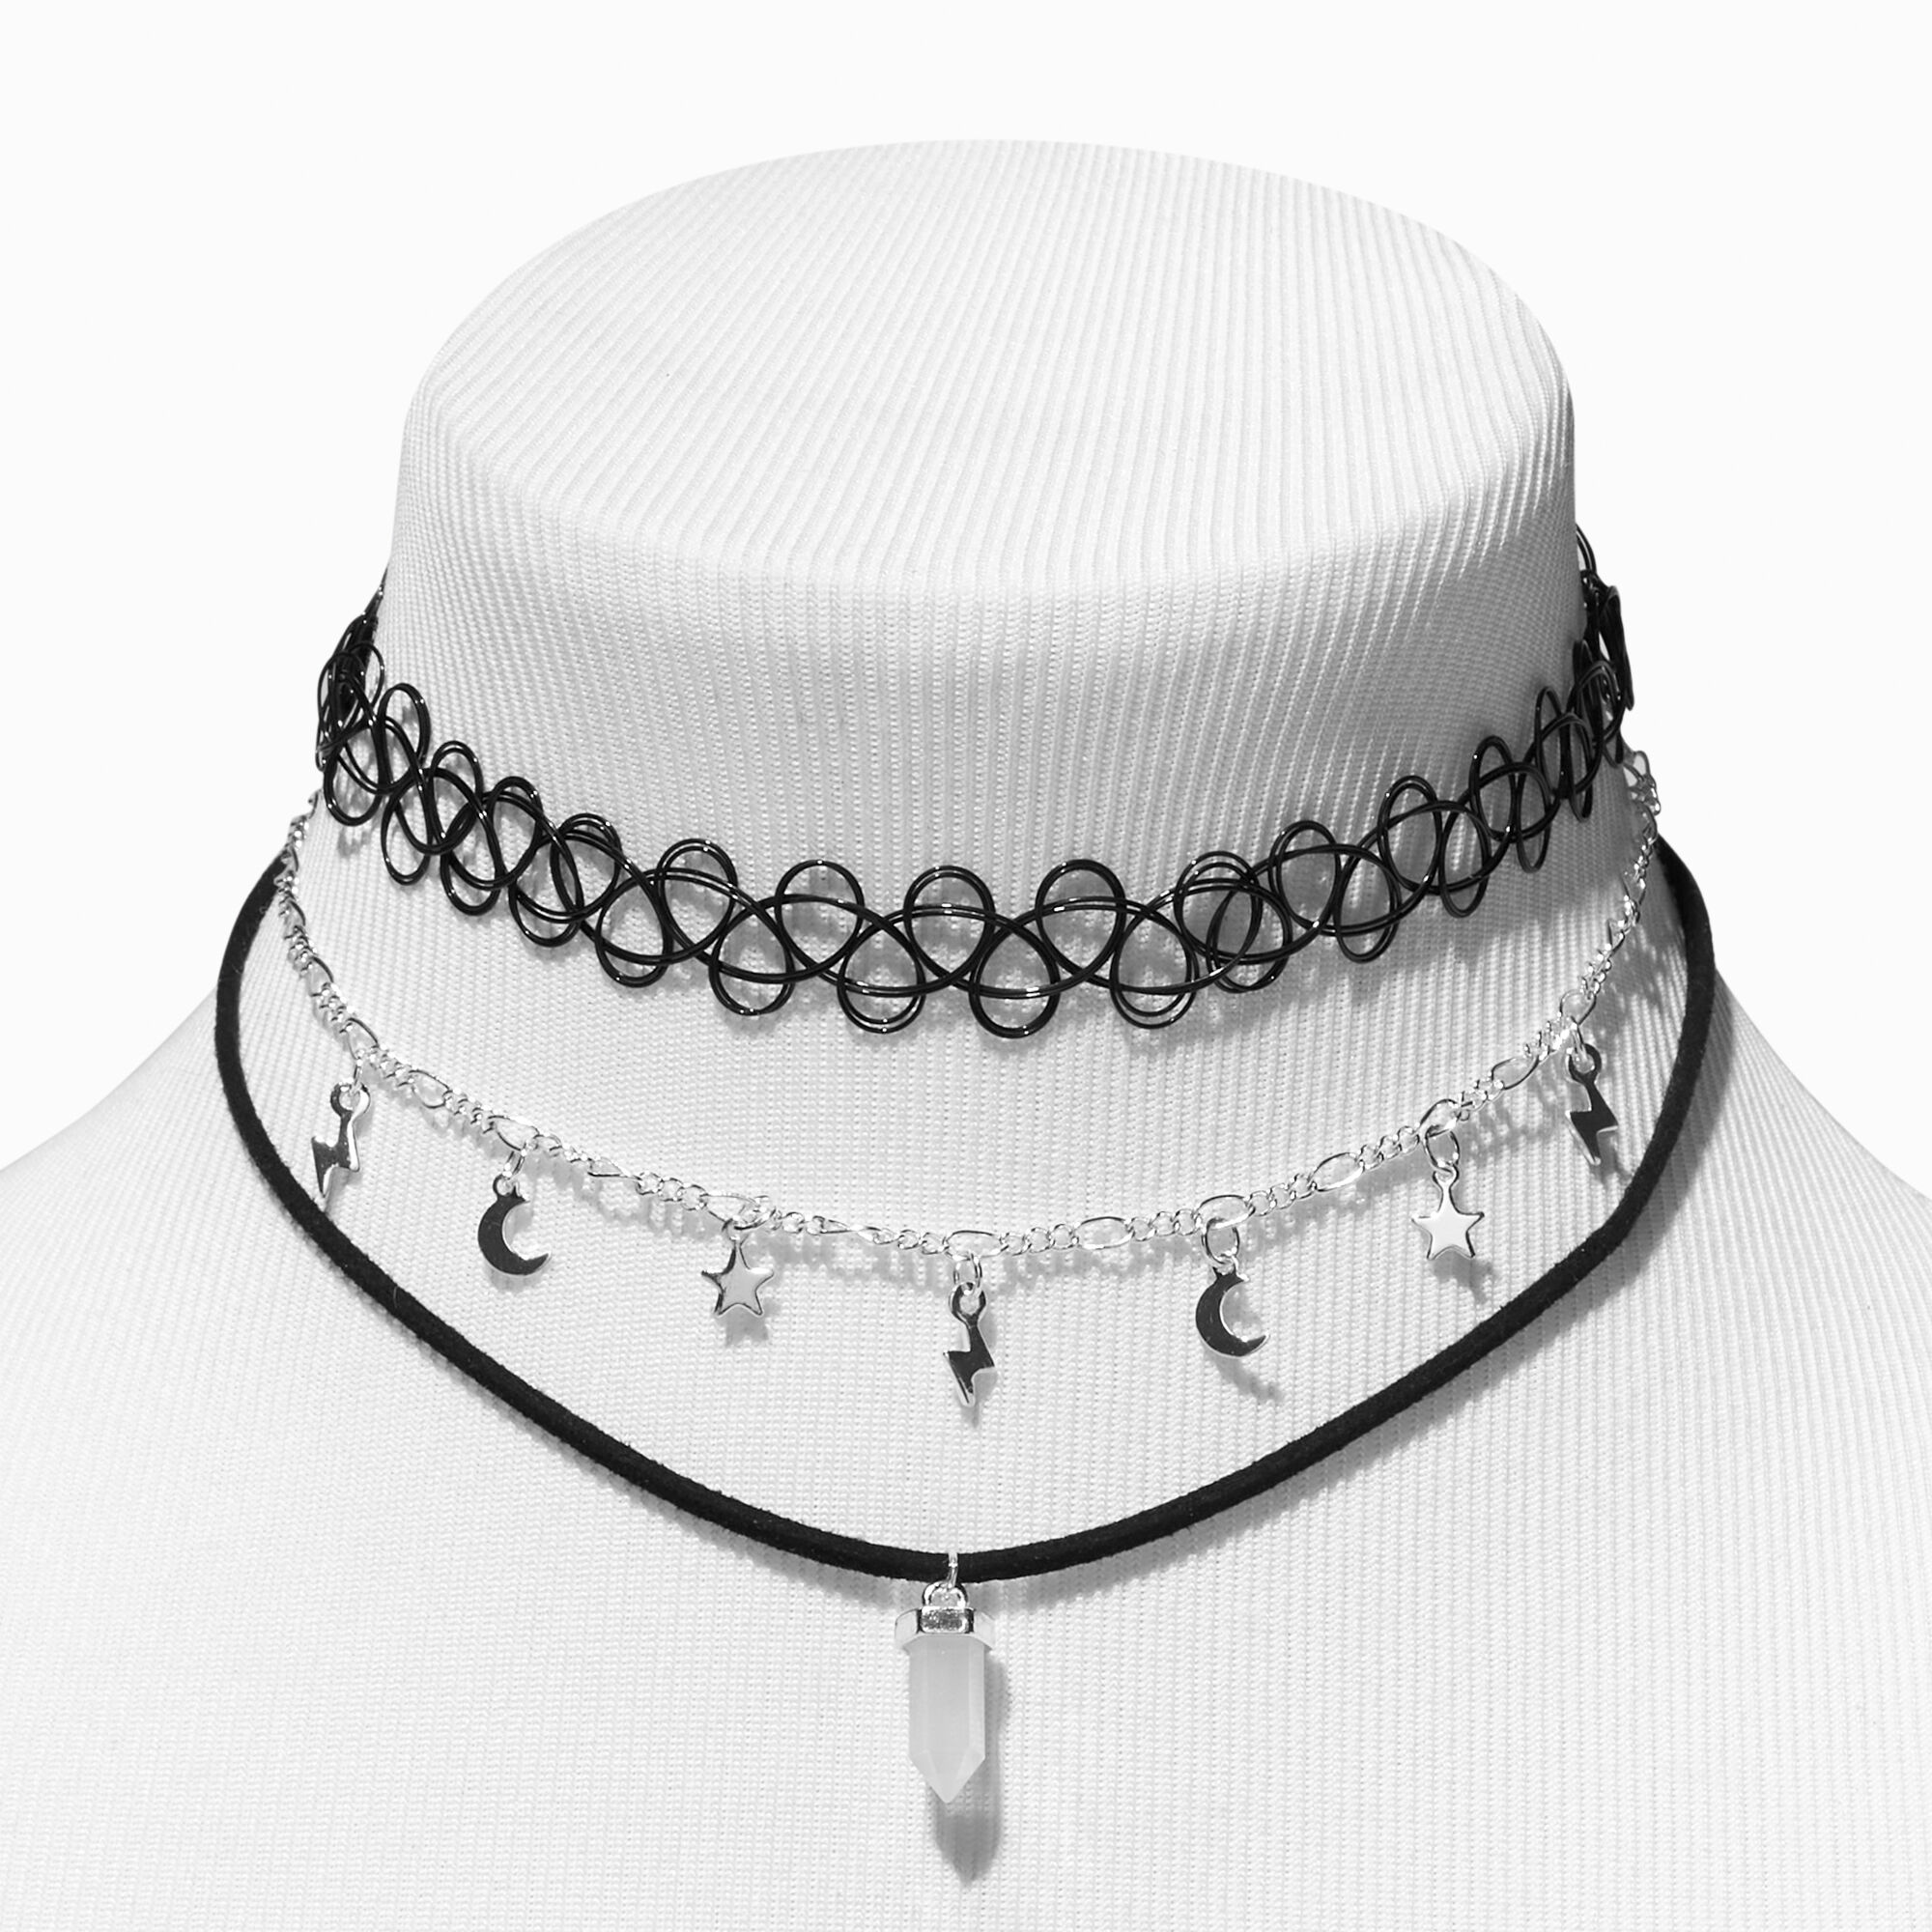 View Claires Mystical Gem Celestial Black Tattoo Choker Necklaces 3 Pack White information